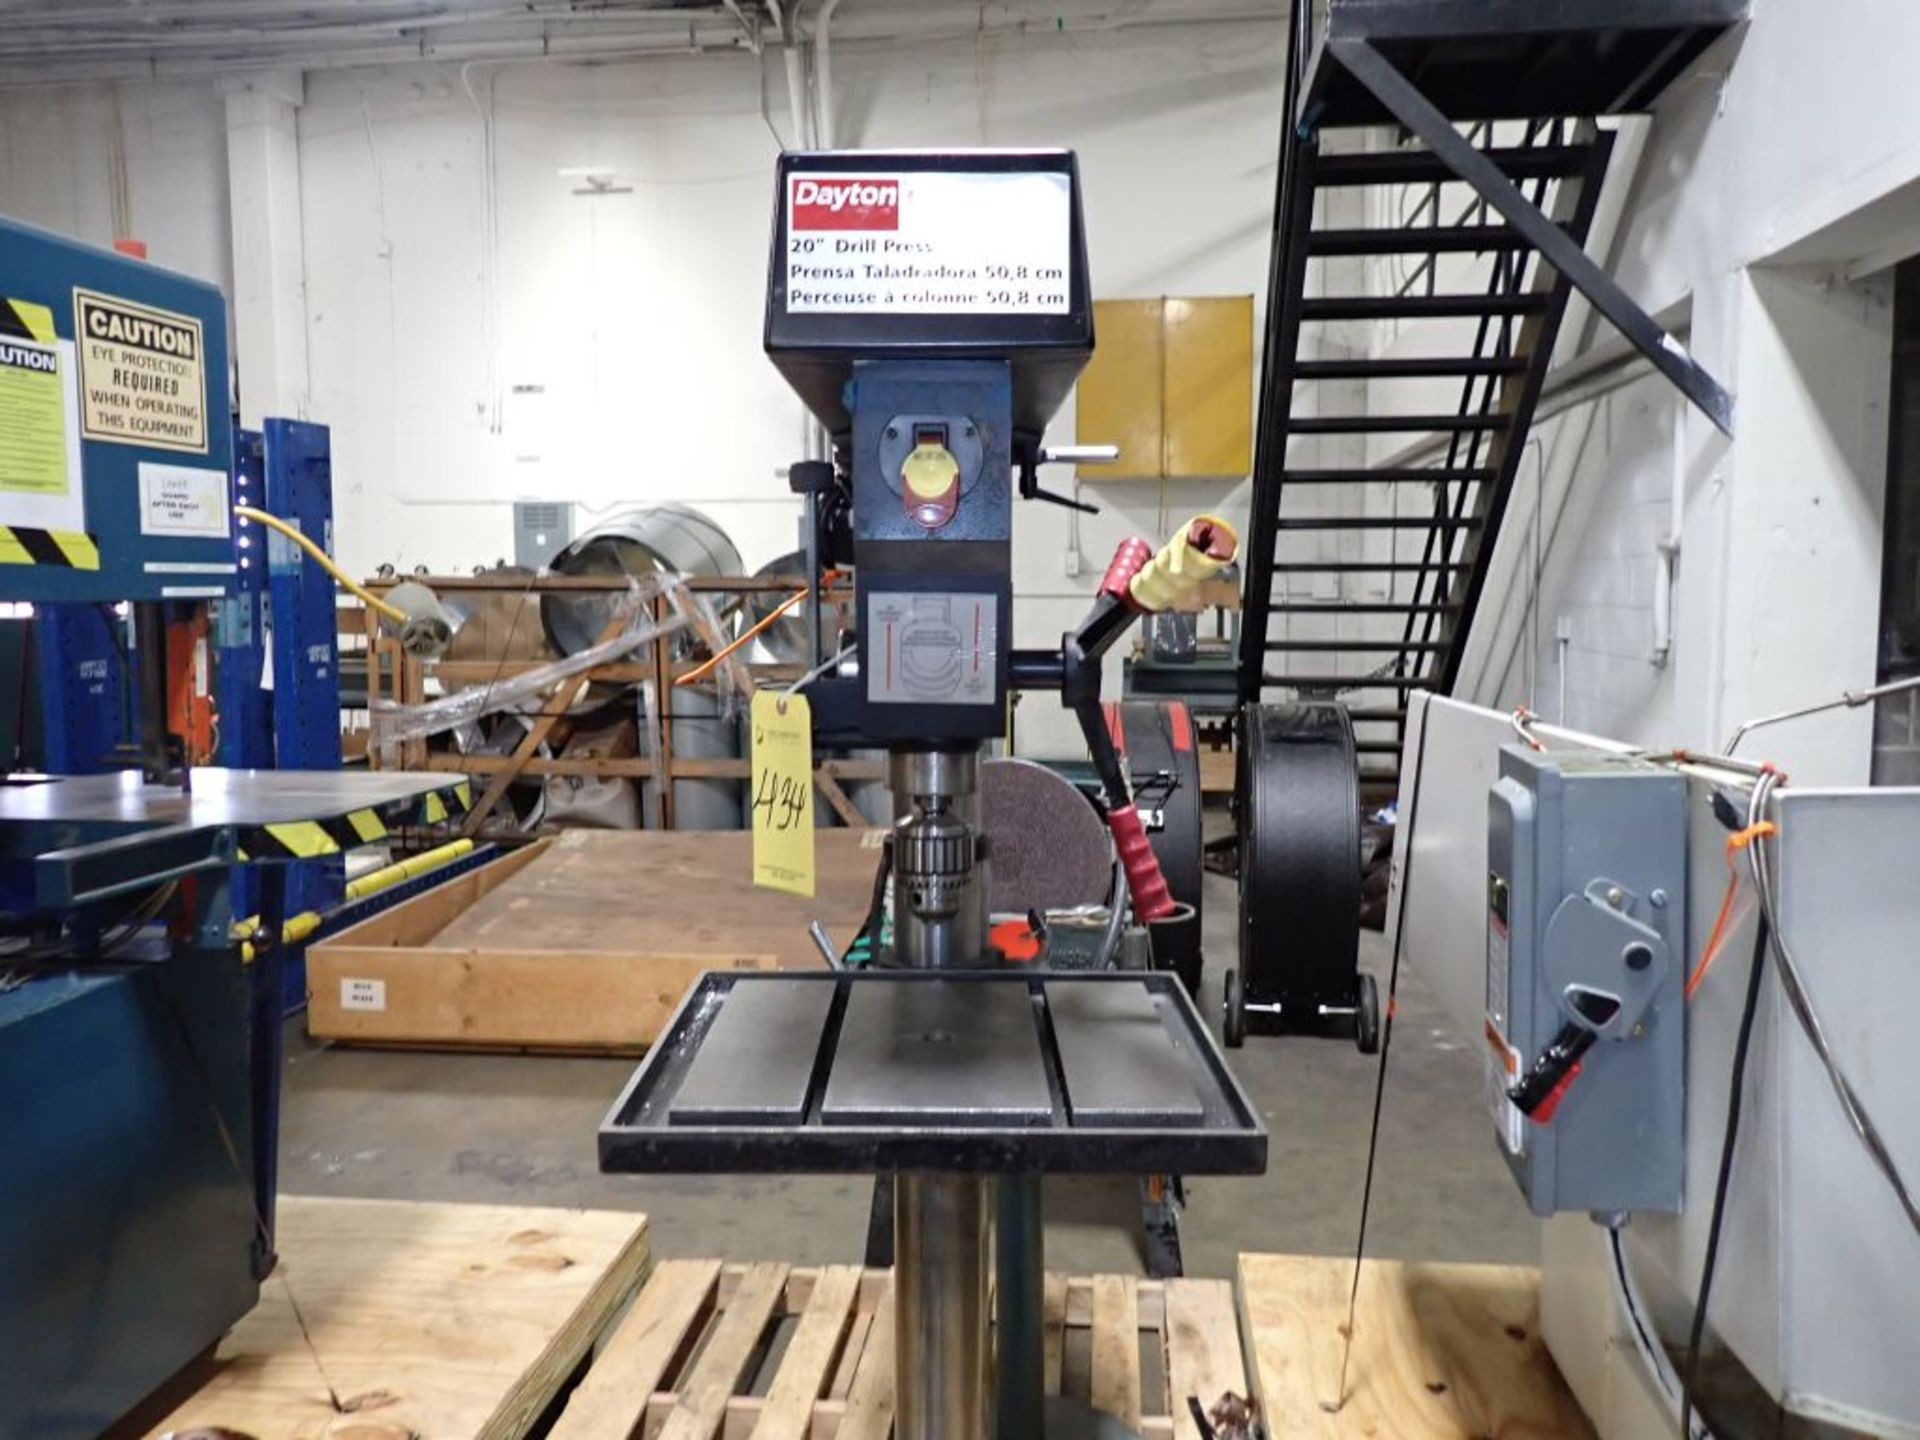 Dayton 20" Drill Press | 115V; Tag: 241434 | Limited Forklift Assistance Available - $10.00 Lot - Image 2 of 4